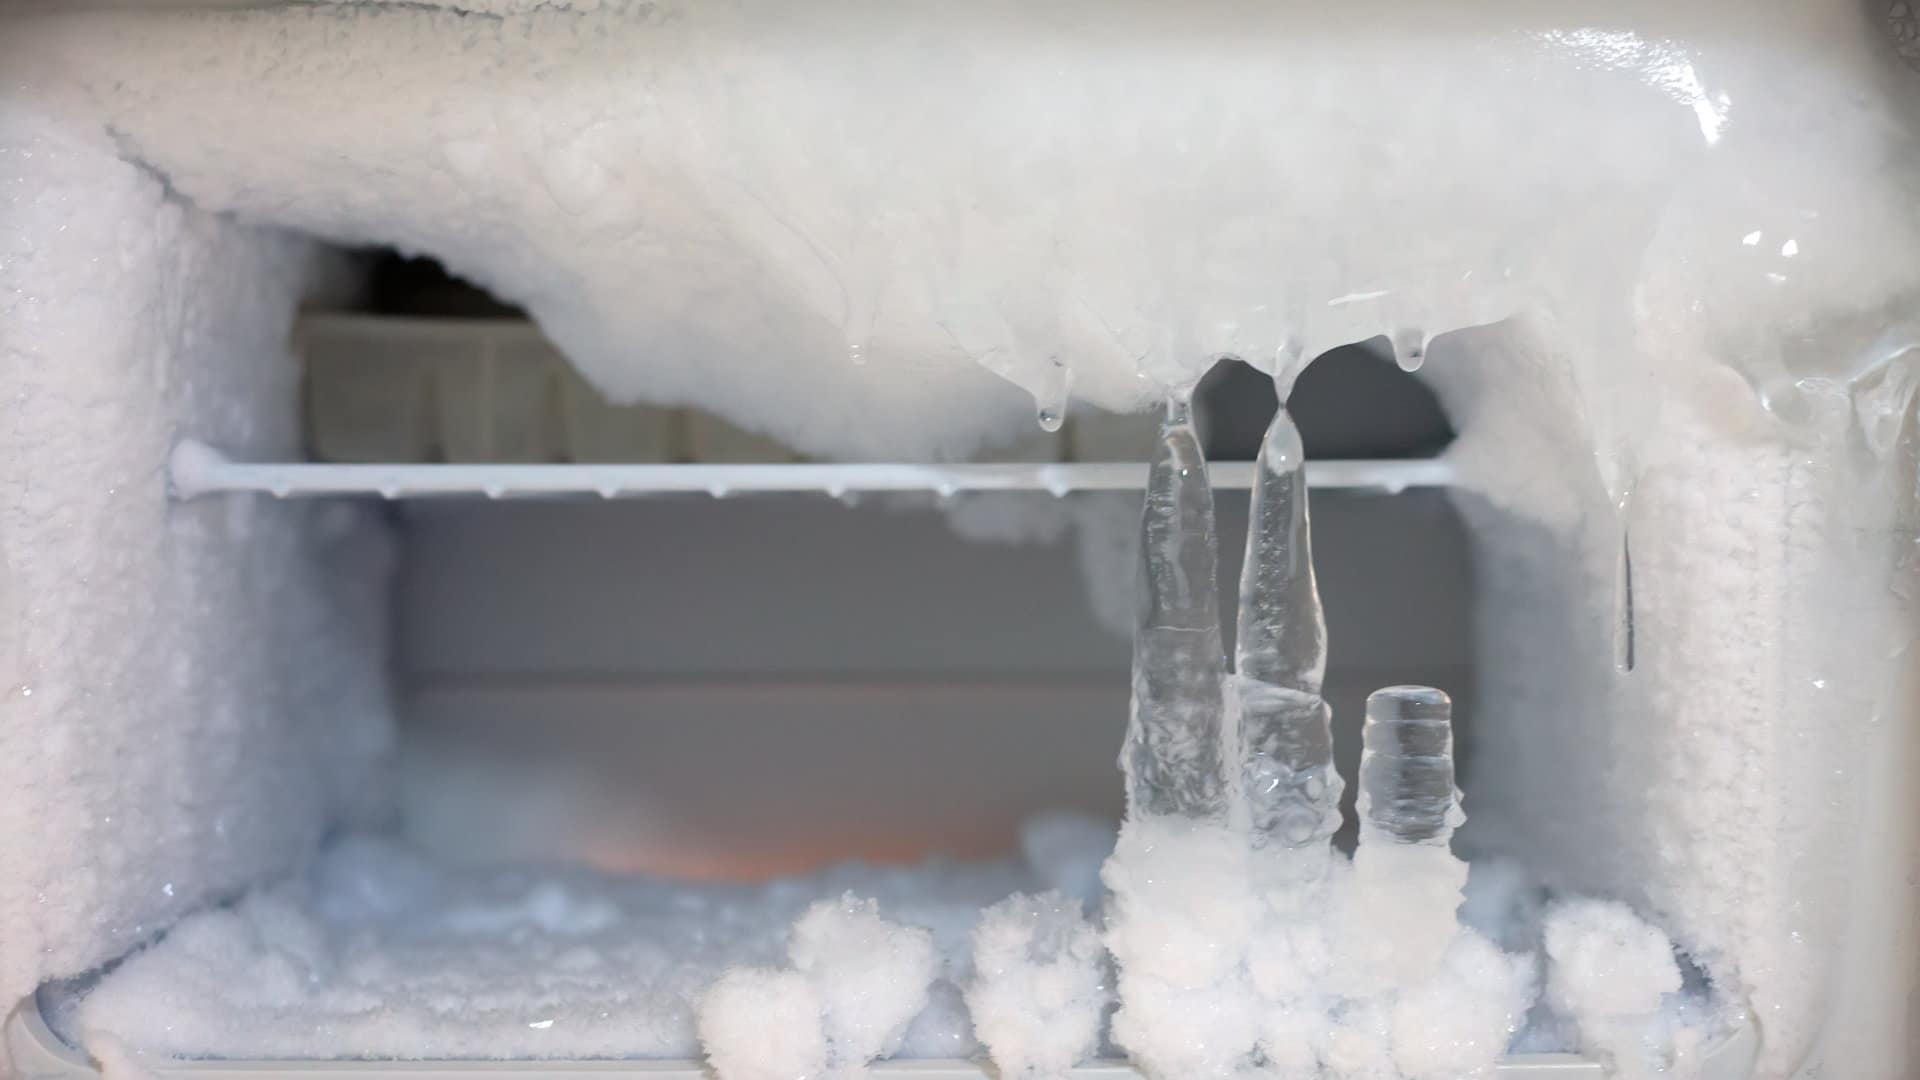 How To Quickly Defrost A Freezer